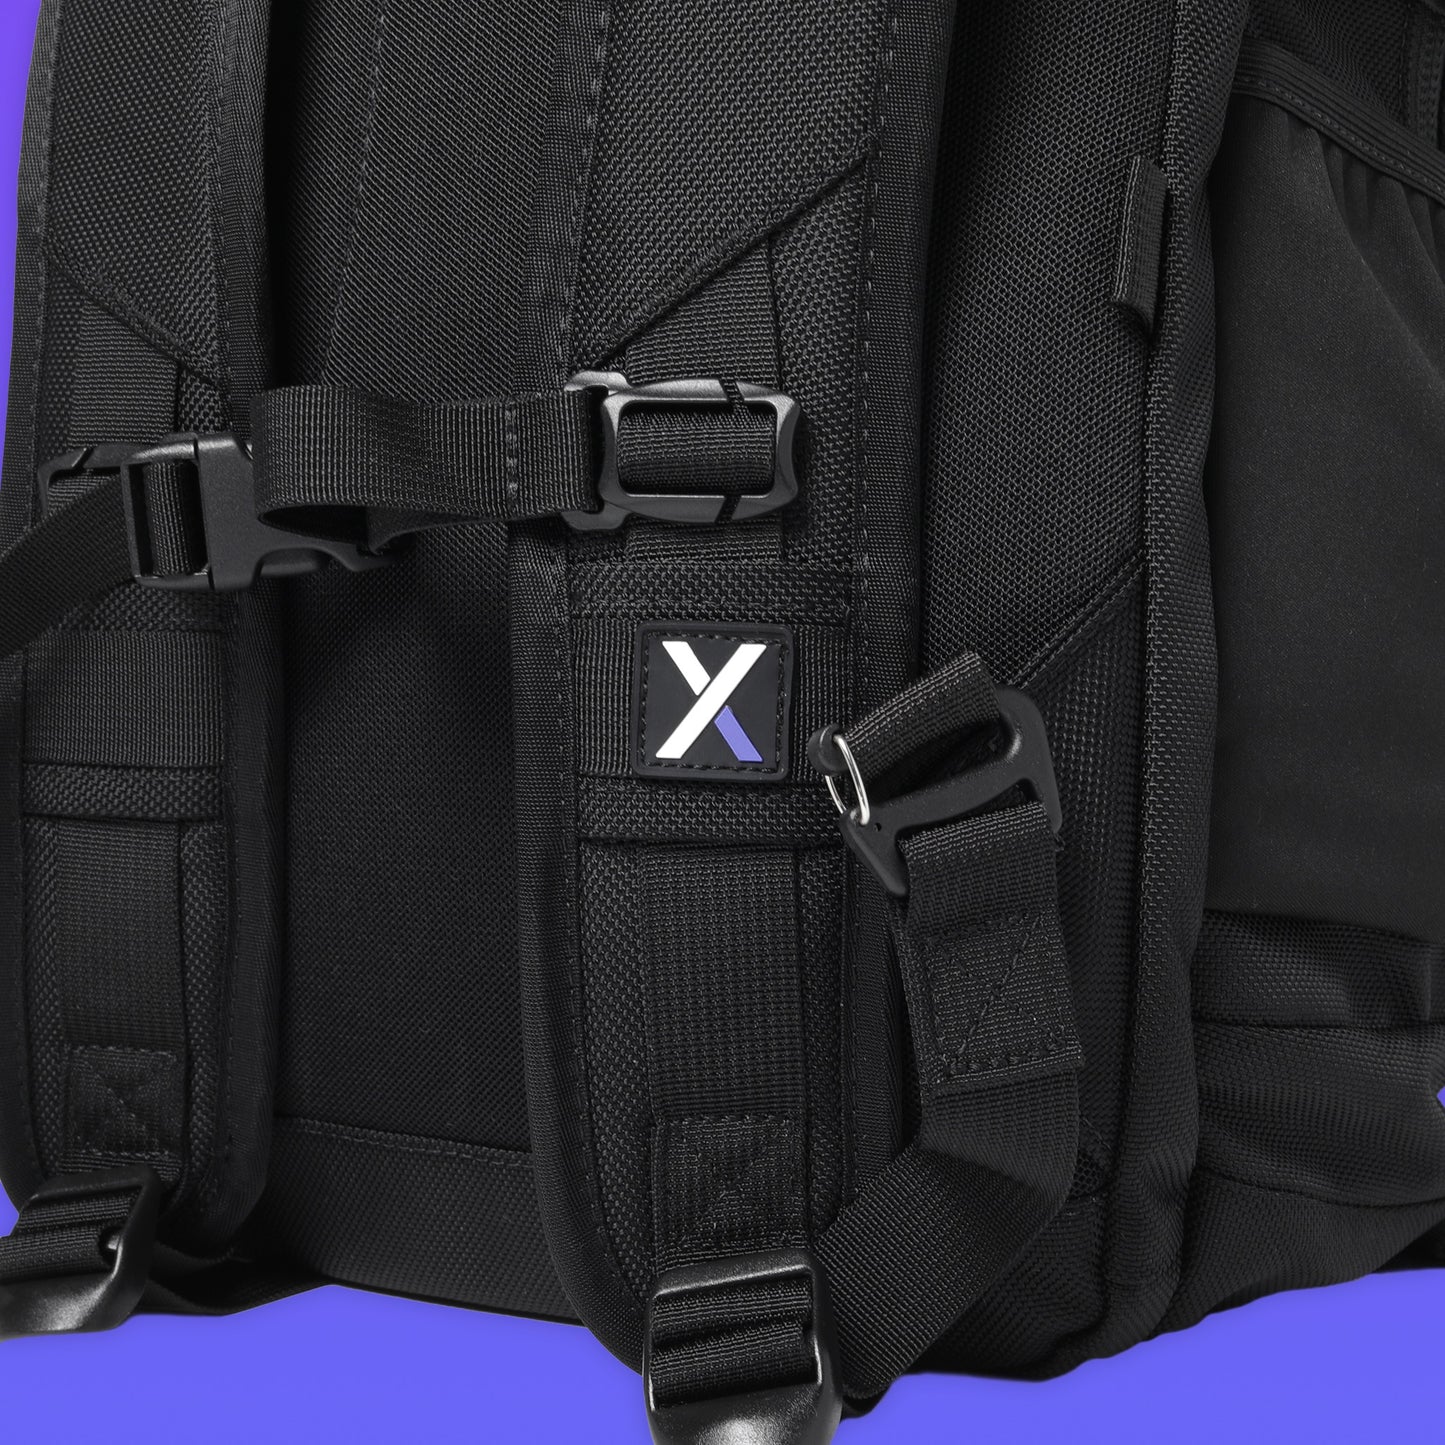 dYdX x DSPTCH Backpack